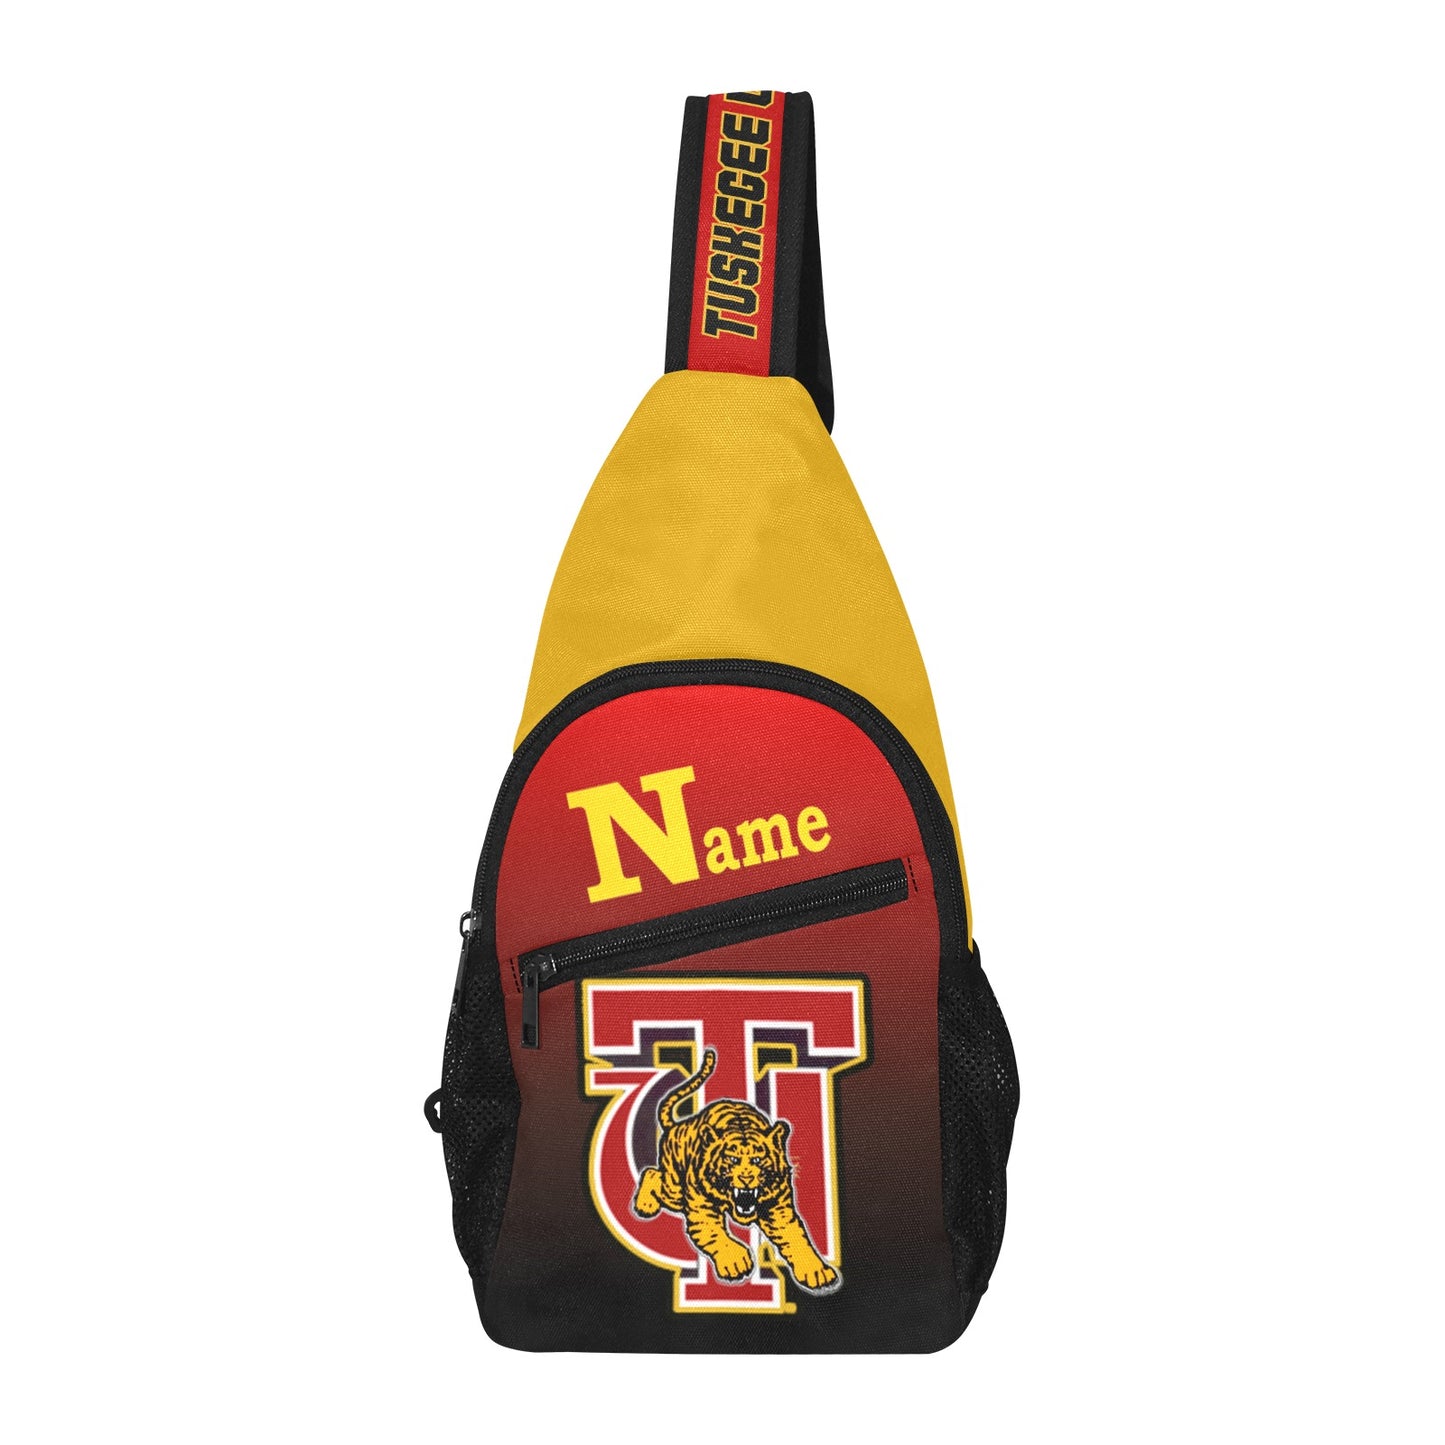 Tuskegee Crossbody Bag - Customize with your name.